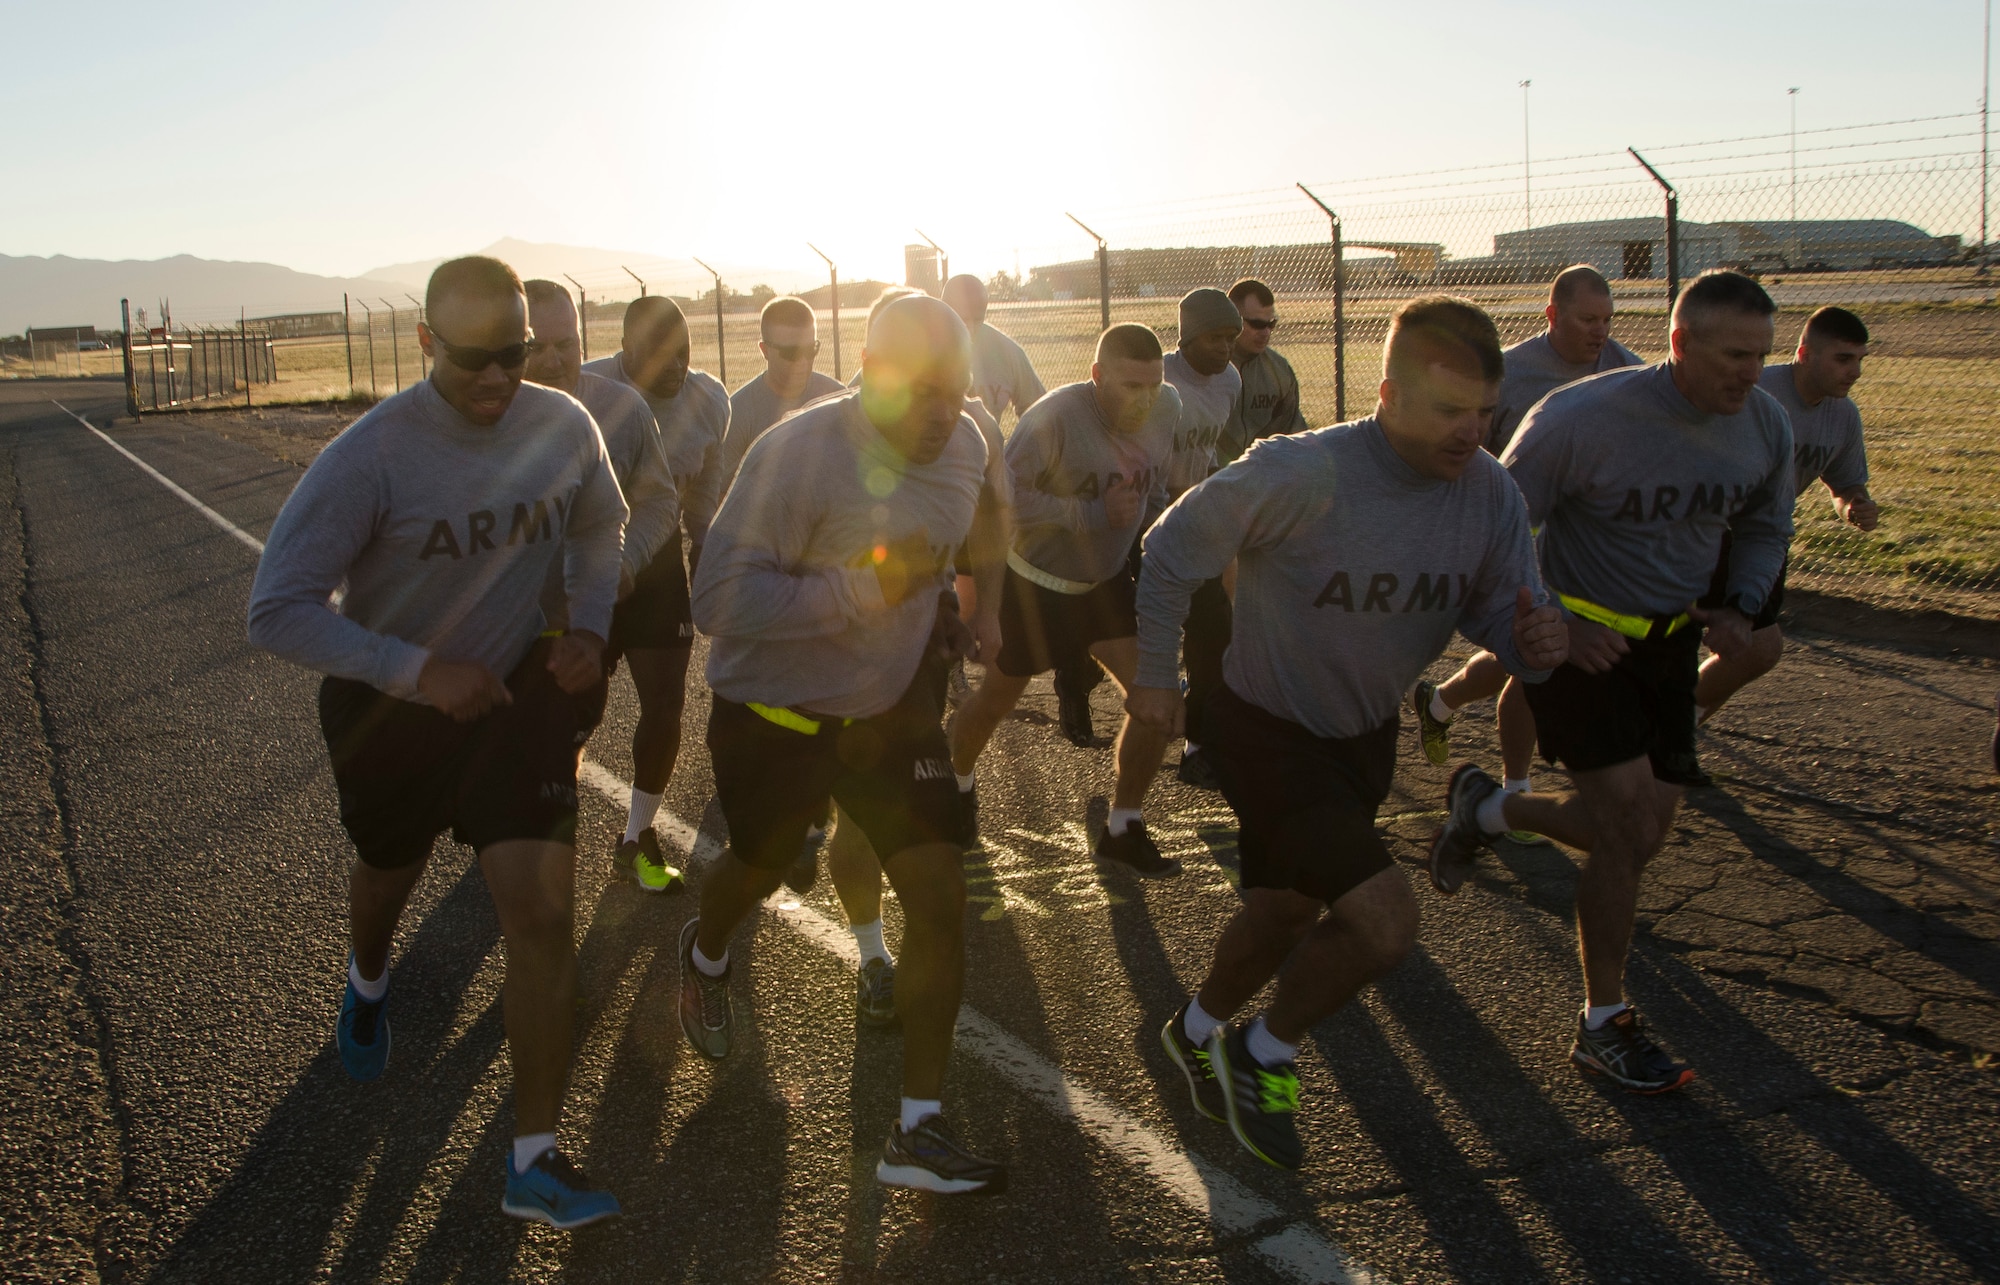 Members of the 1st Battlefield Coordination Detachment being the running portion of the Army physical fitness test at Davis-Monthan AFB, Ariz., Nov. 4, 2014.  The test is a three-event physical performance test used to assess muscular endurance and cardiograms fitness for all ages. (U.S. Air Force photo by Staff Sgt. Adam Grant/Released)